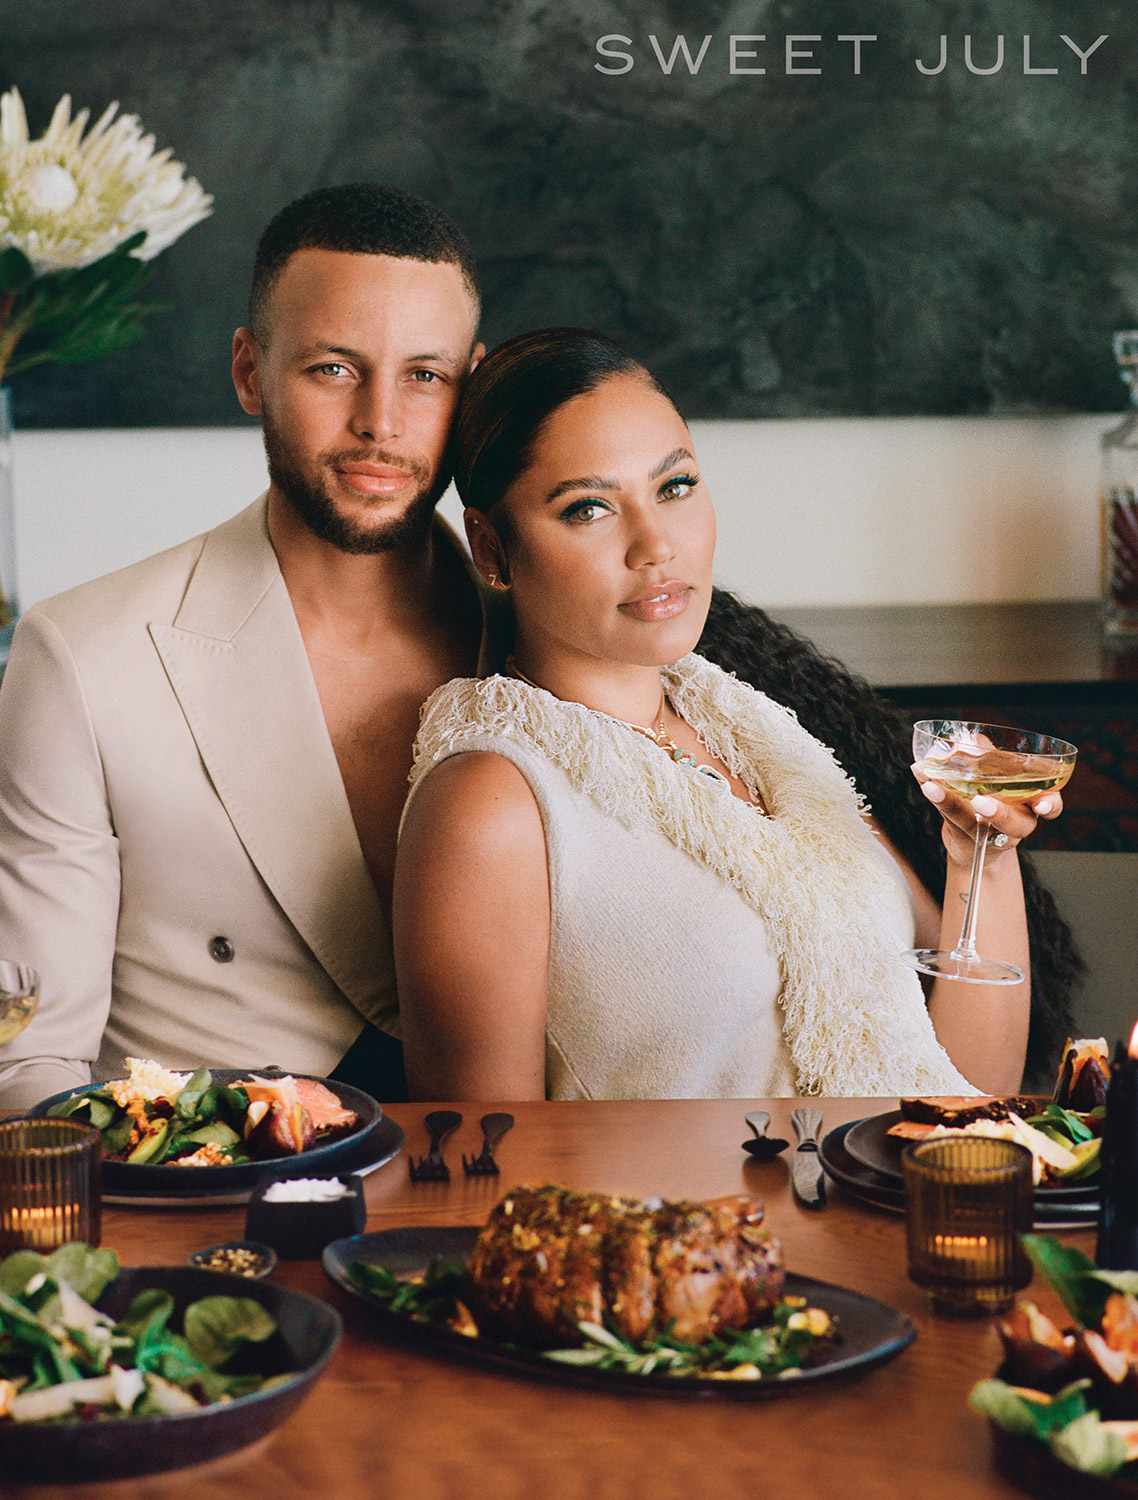 Ayesha and Steph Curry Photographed with Their 3 Children in Sweet July Cover Sneak Peek